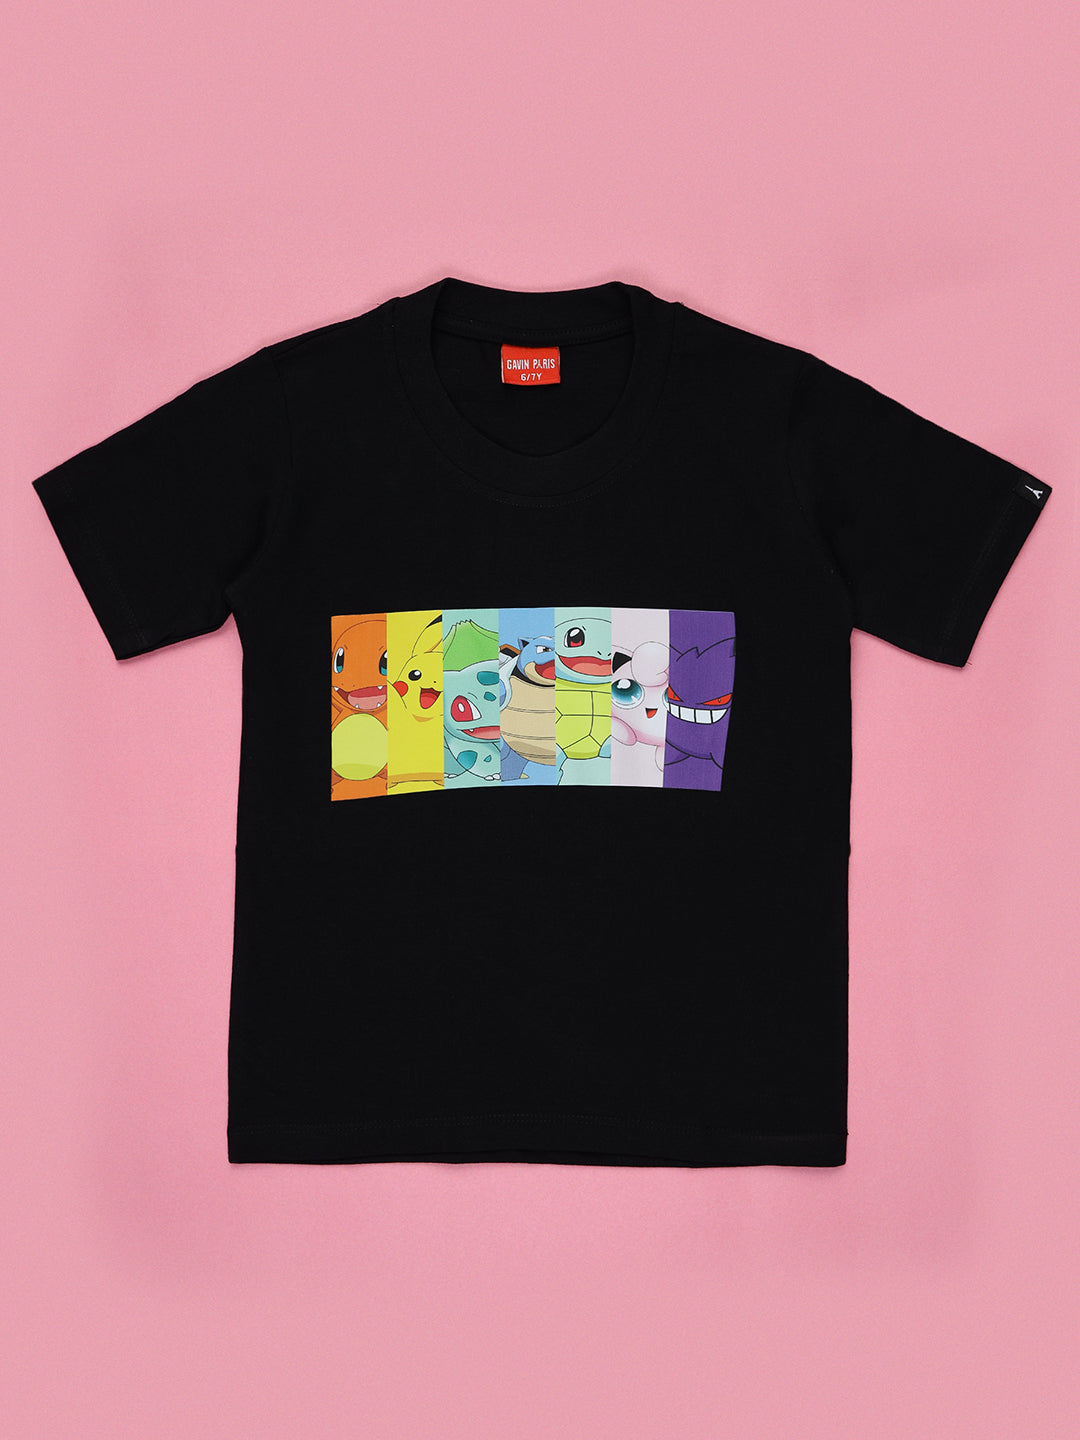 7 Character T-shirts for Boys & Girls